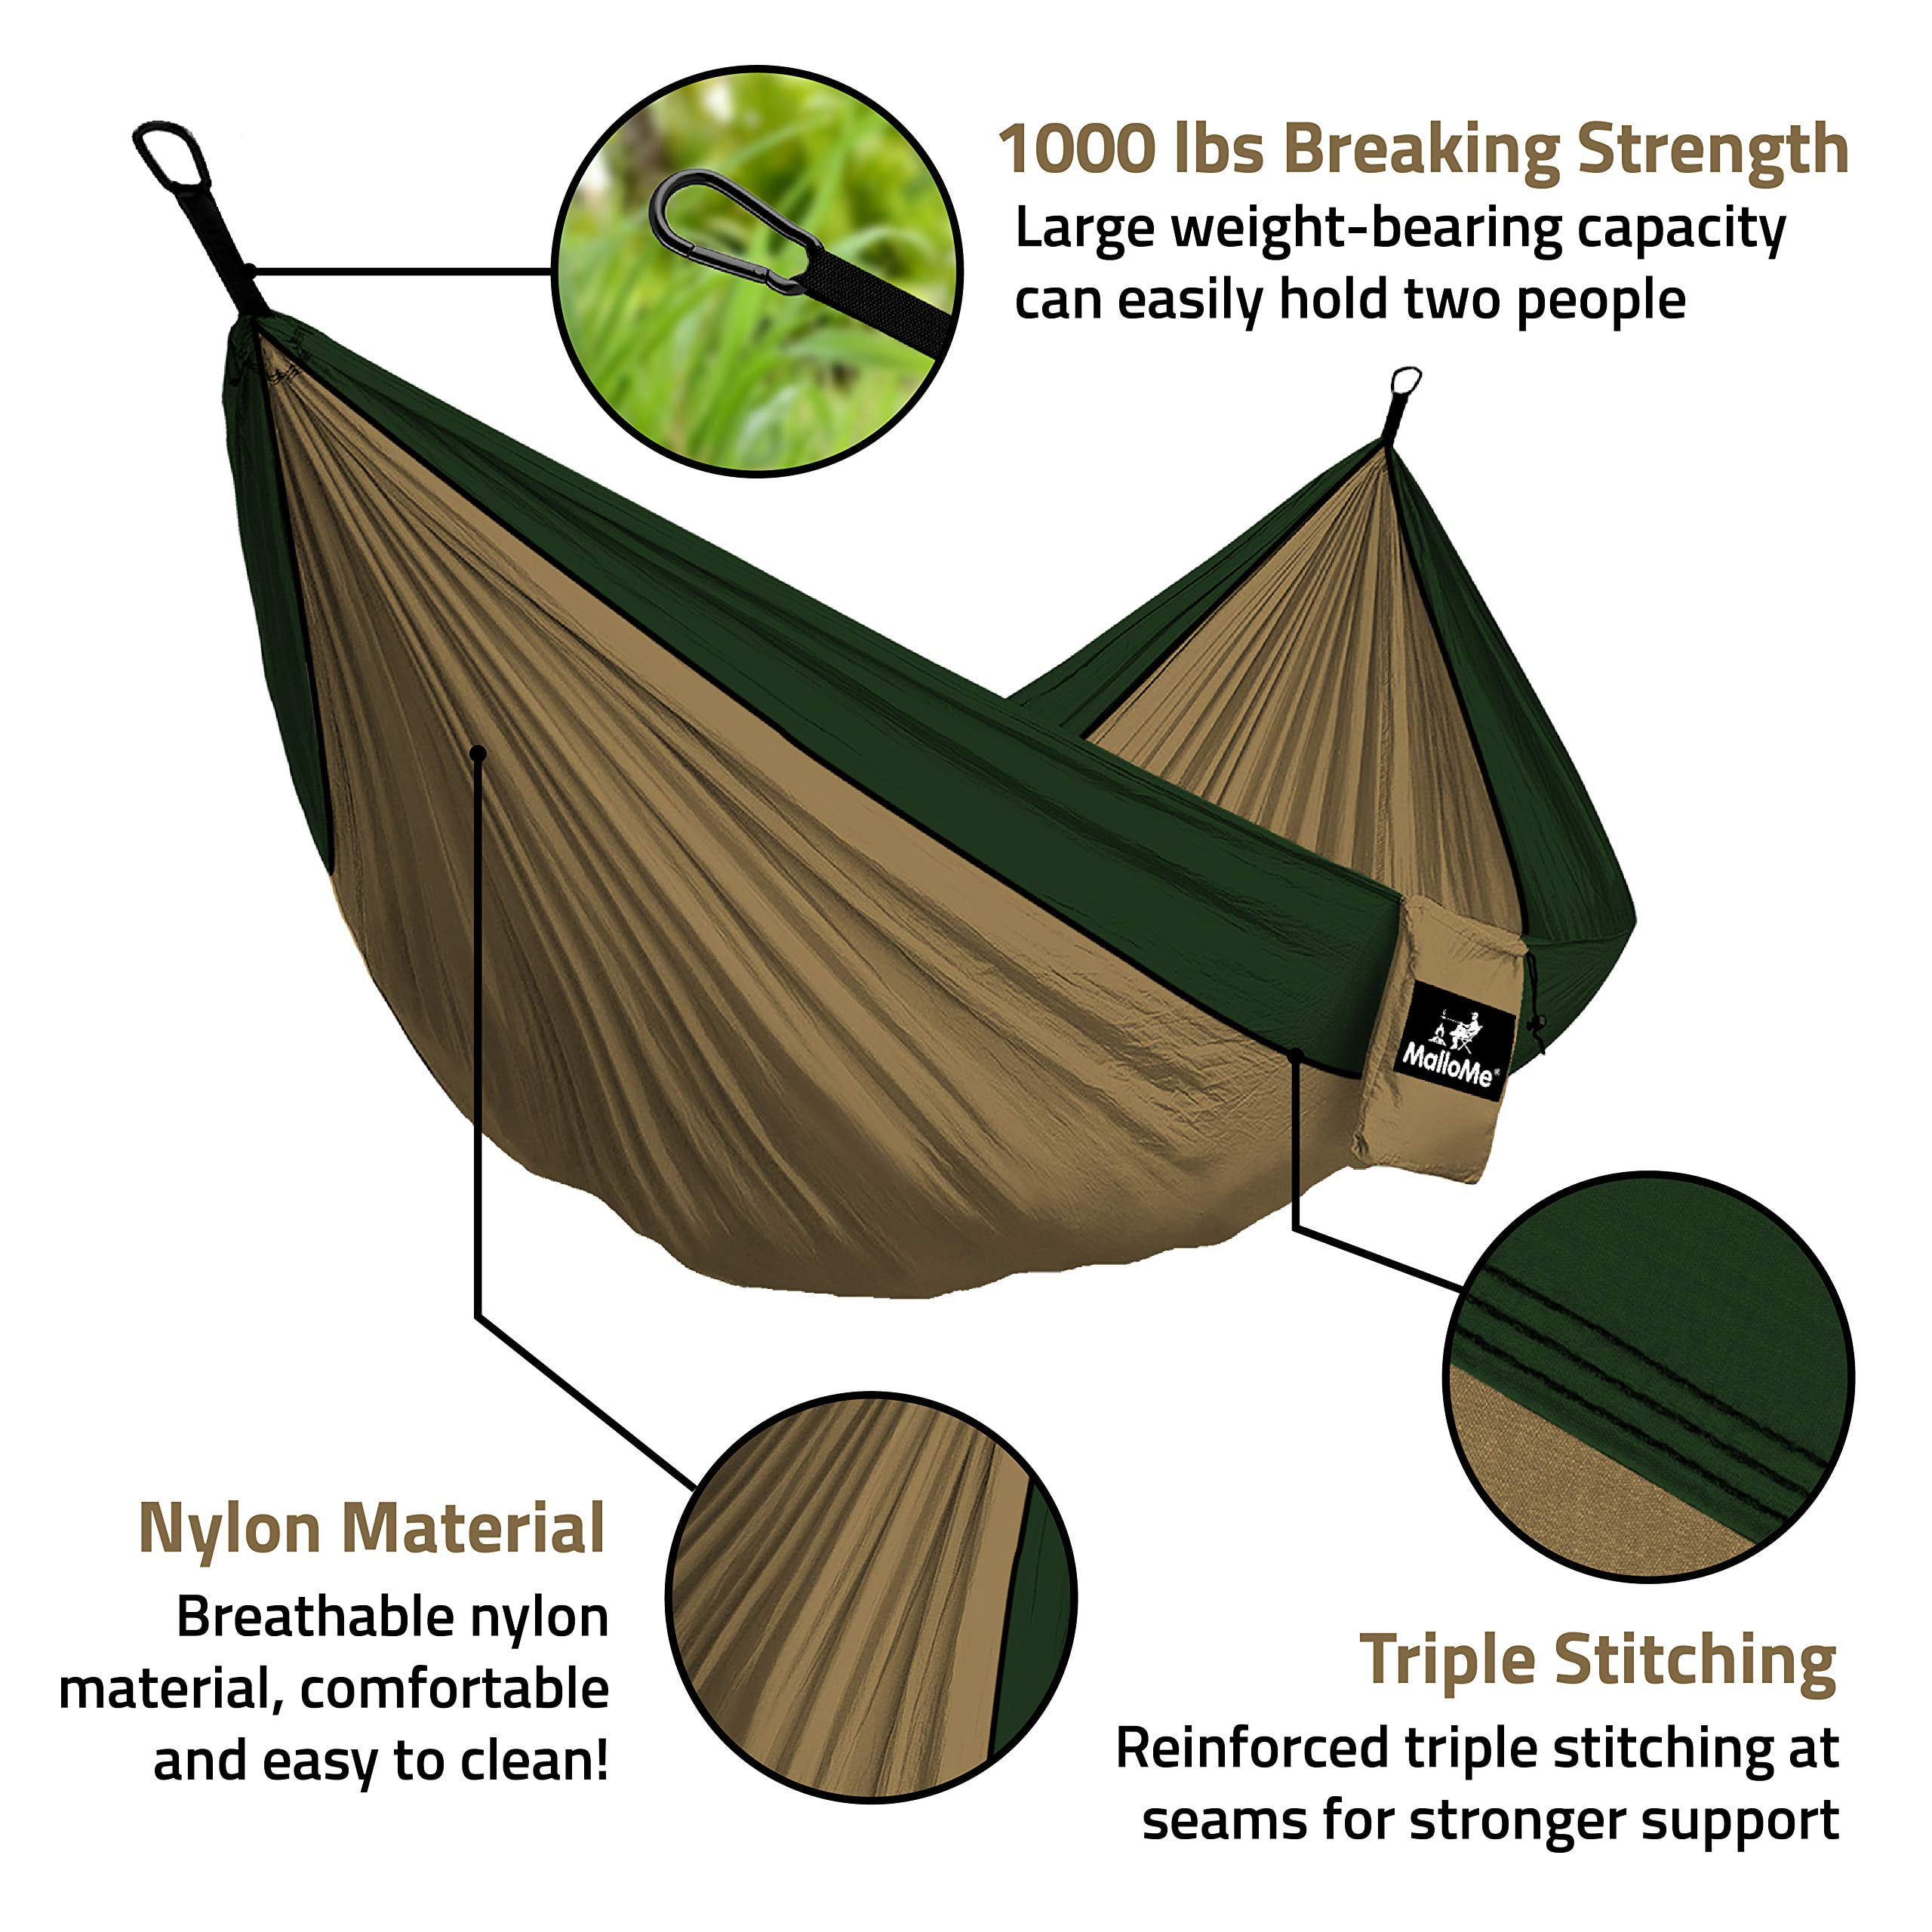 2 Person Equipment Kids Accessories Max 1000 lbs Breaking Capacity MalloMe Double & Single Portable Camping Hammock Parachute Lightweight Nylon with Hammok Tree Straps Set Free 2 Carabiners 